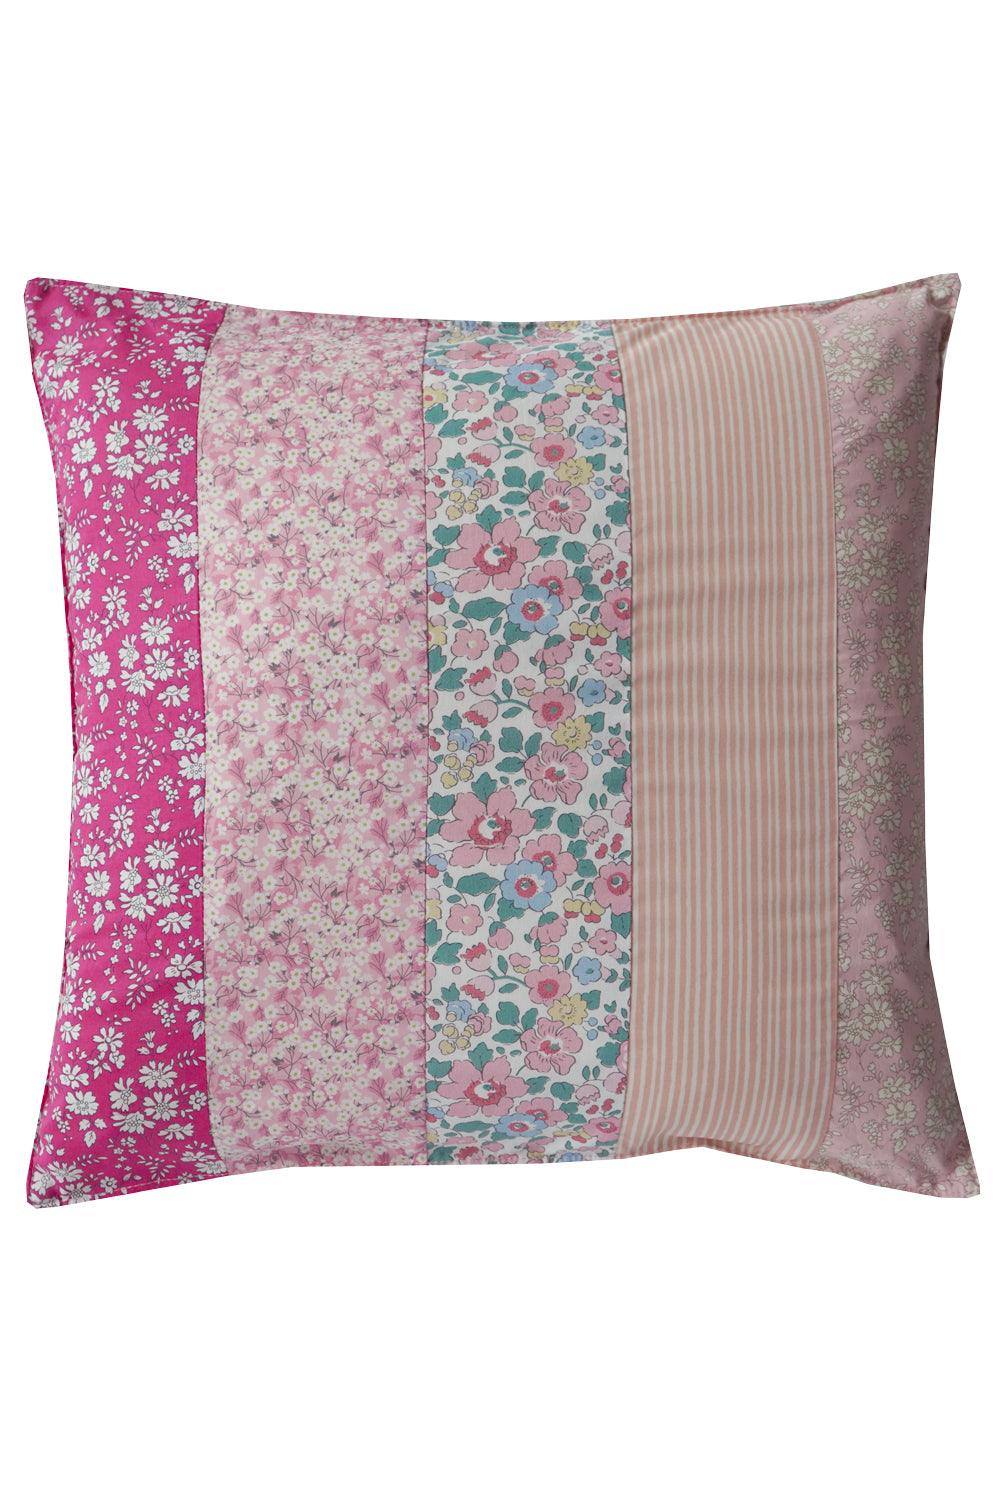 Patchwork Cushion made with Striped Liberty Fabric - Coco & Wolf